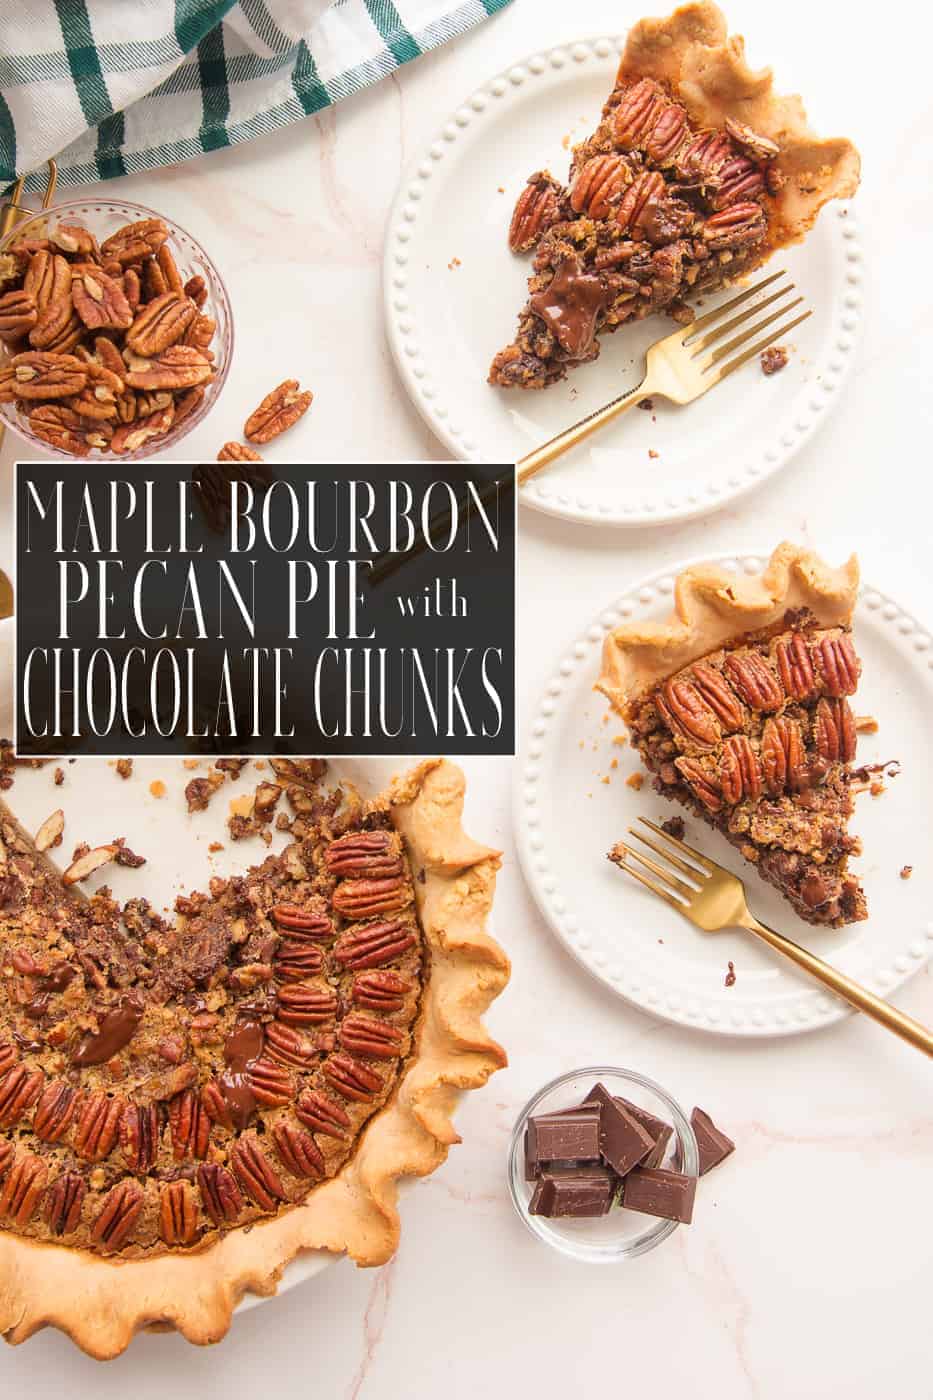 Maple Bourbon Pecan Pie with Chocolate Chunks adds new elements of flavor to what could be a boring pecan pie. Made without corn syrup, this pie has bittersweet chocolate chunks and a nice dose of spicy bourbon to cut through the sweetness of maple-coated pecans. Make this for your next holiday gathering. #pecanpie #bourbonpecanpie #maplepecanpie #pie #piebaking #pierecipe #mealypiedough #piedough #baking #holidaydessertrecipe #holidaydessert #holidayrecipe #Thanksgiving #Christmas via @ediblesense